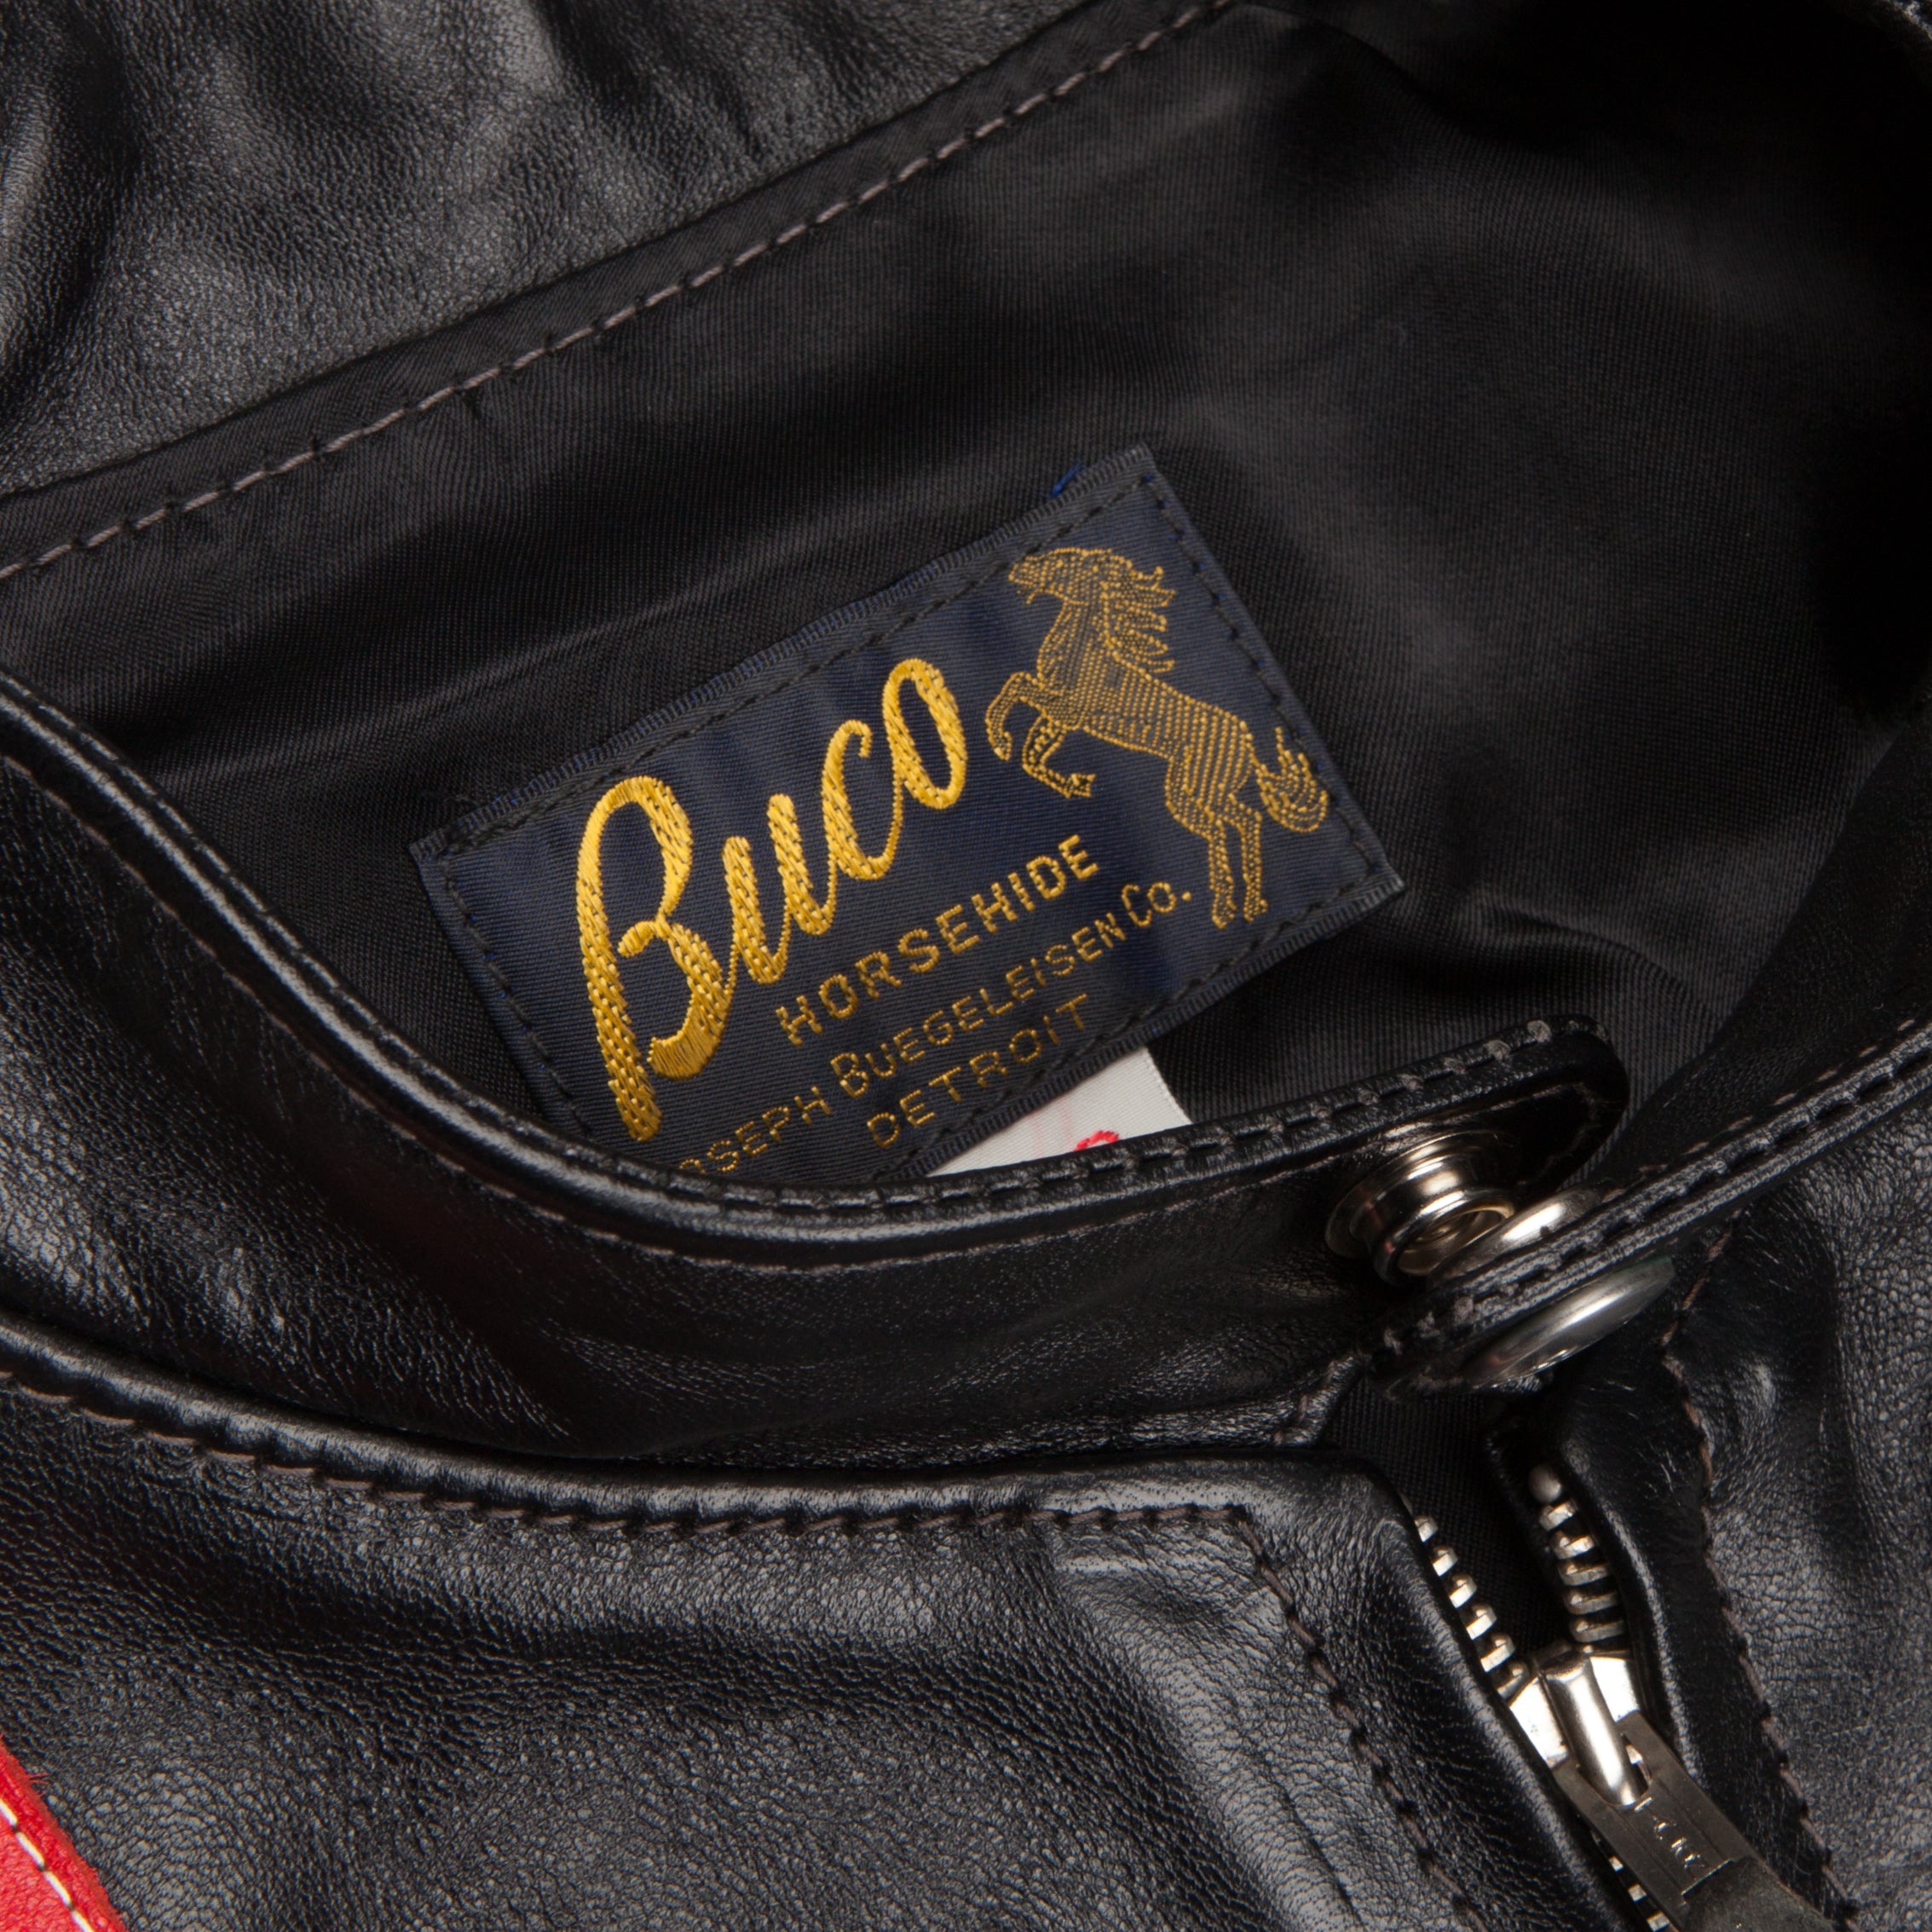 The Real McCoy's Buco J-100 Cycle Psycho jacket – Frans Boone Store